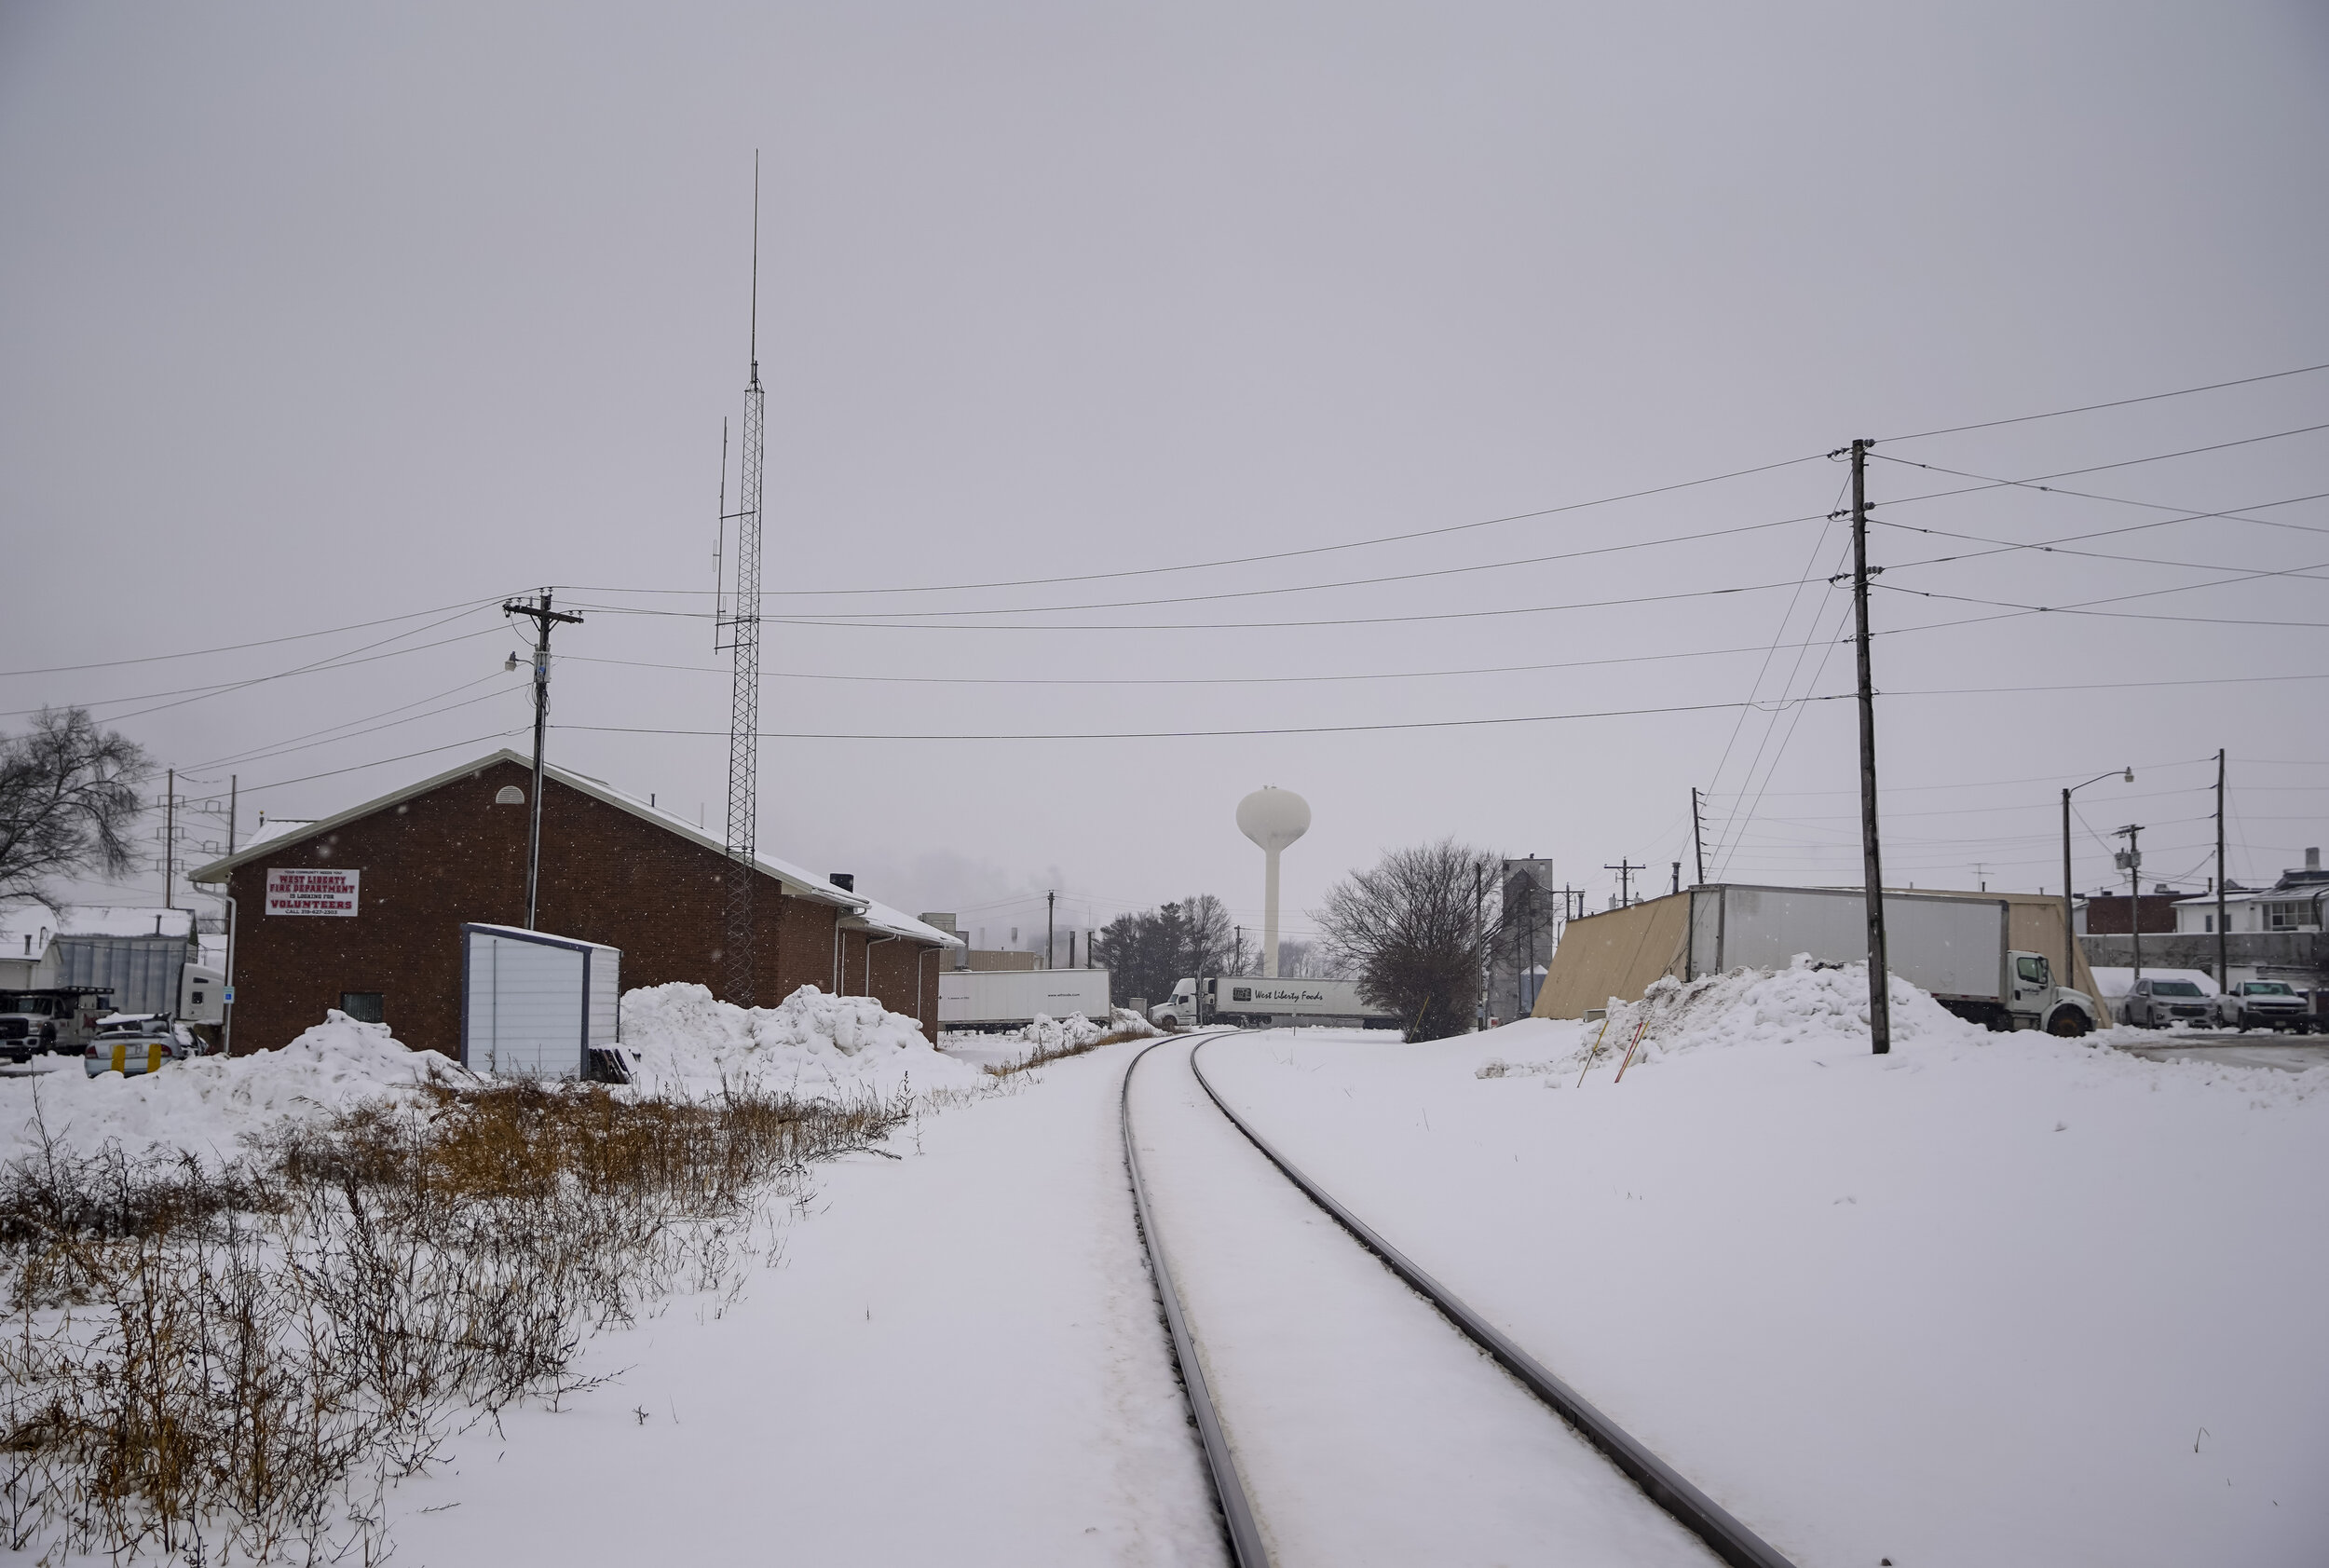   Railroad tracks near West Liberty Foods in West Liberty, IA. 2020. The town is in Muscatine County, Iowa, and as of the 2010 U.S. Census was the only city in the state to have a majority Hispanic population.  